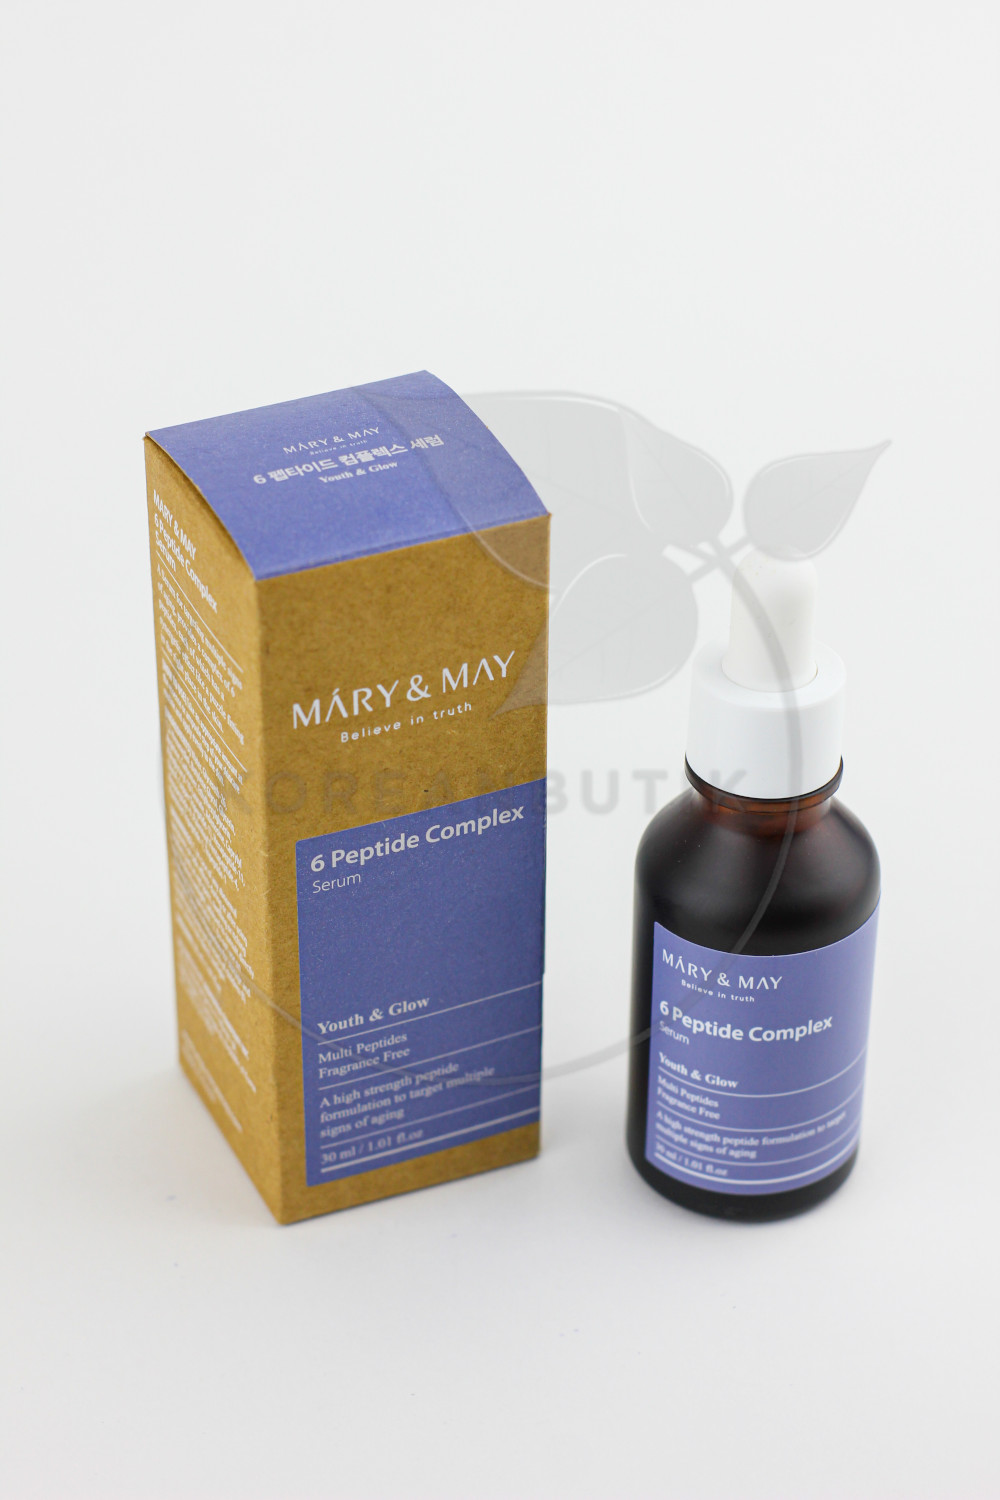  Mary&May 6 Peptide Complex Serum 30ml 